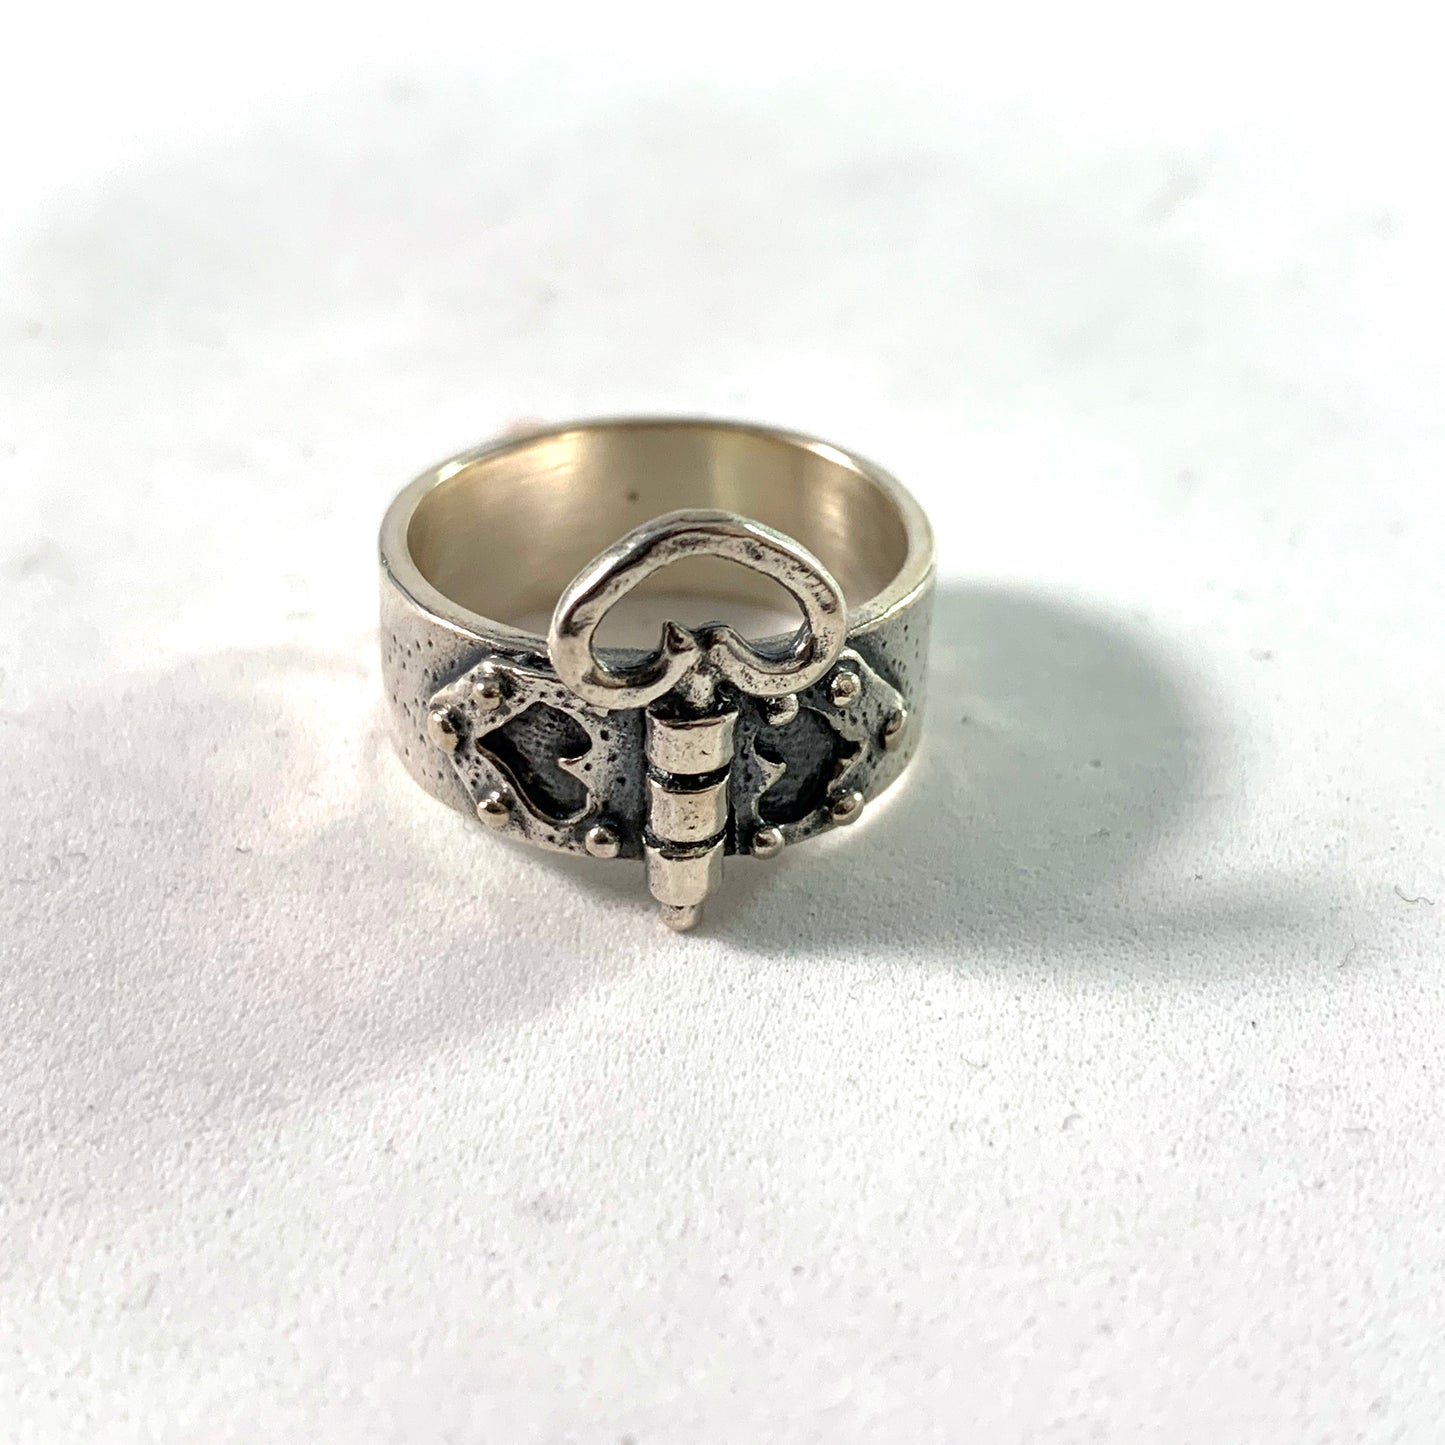 Kello Oy, Finland 1972 Vintage Sterling Silver Heart Love Ring.